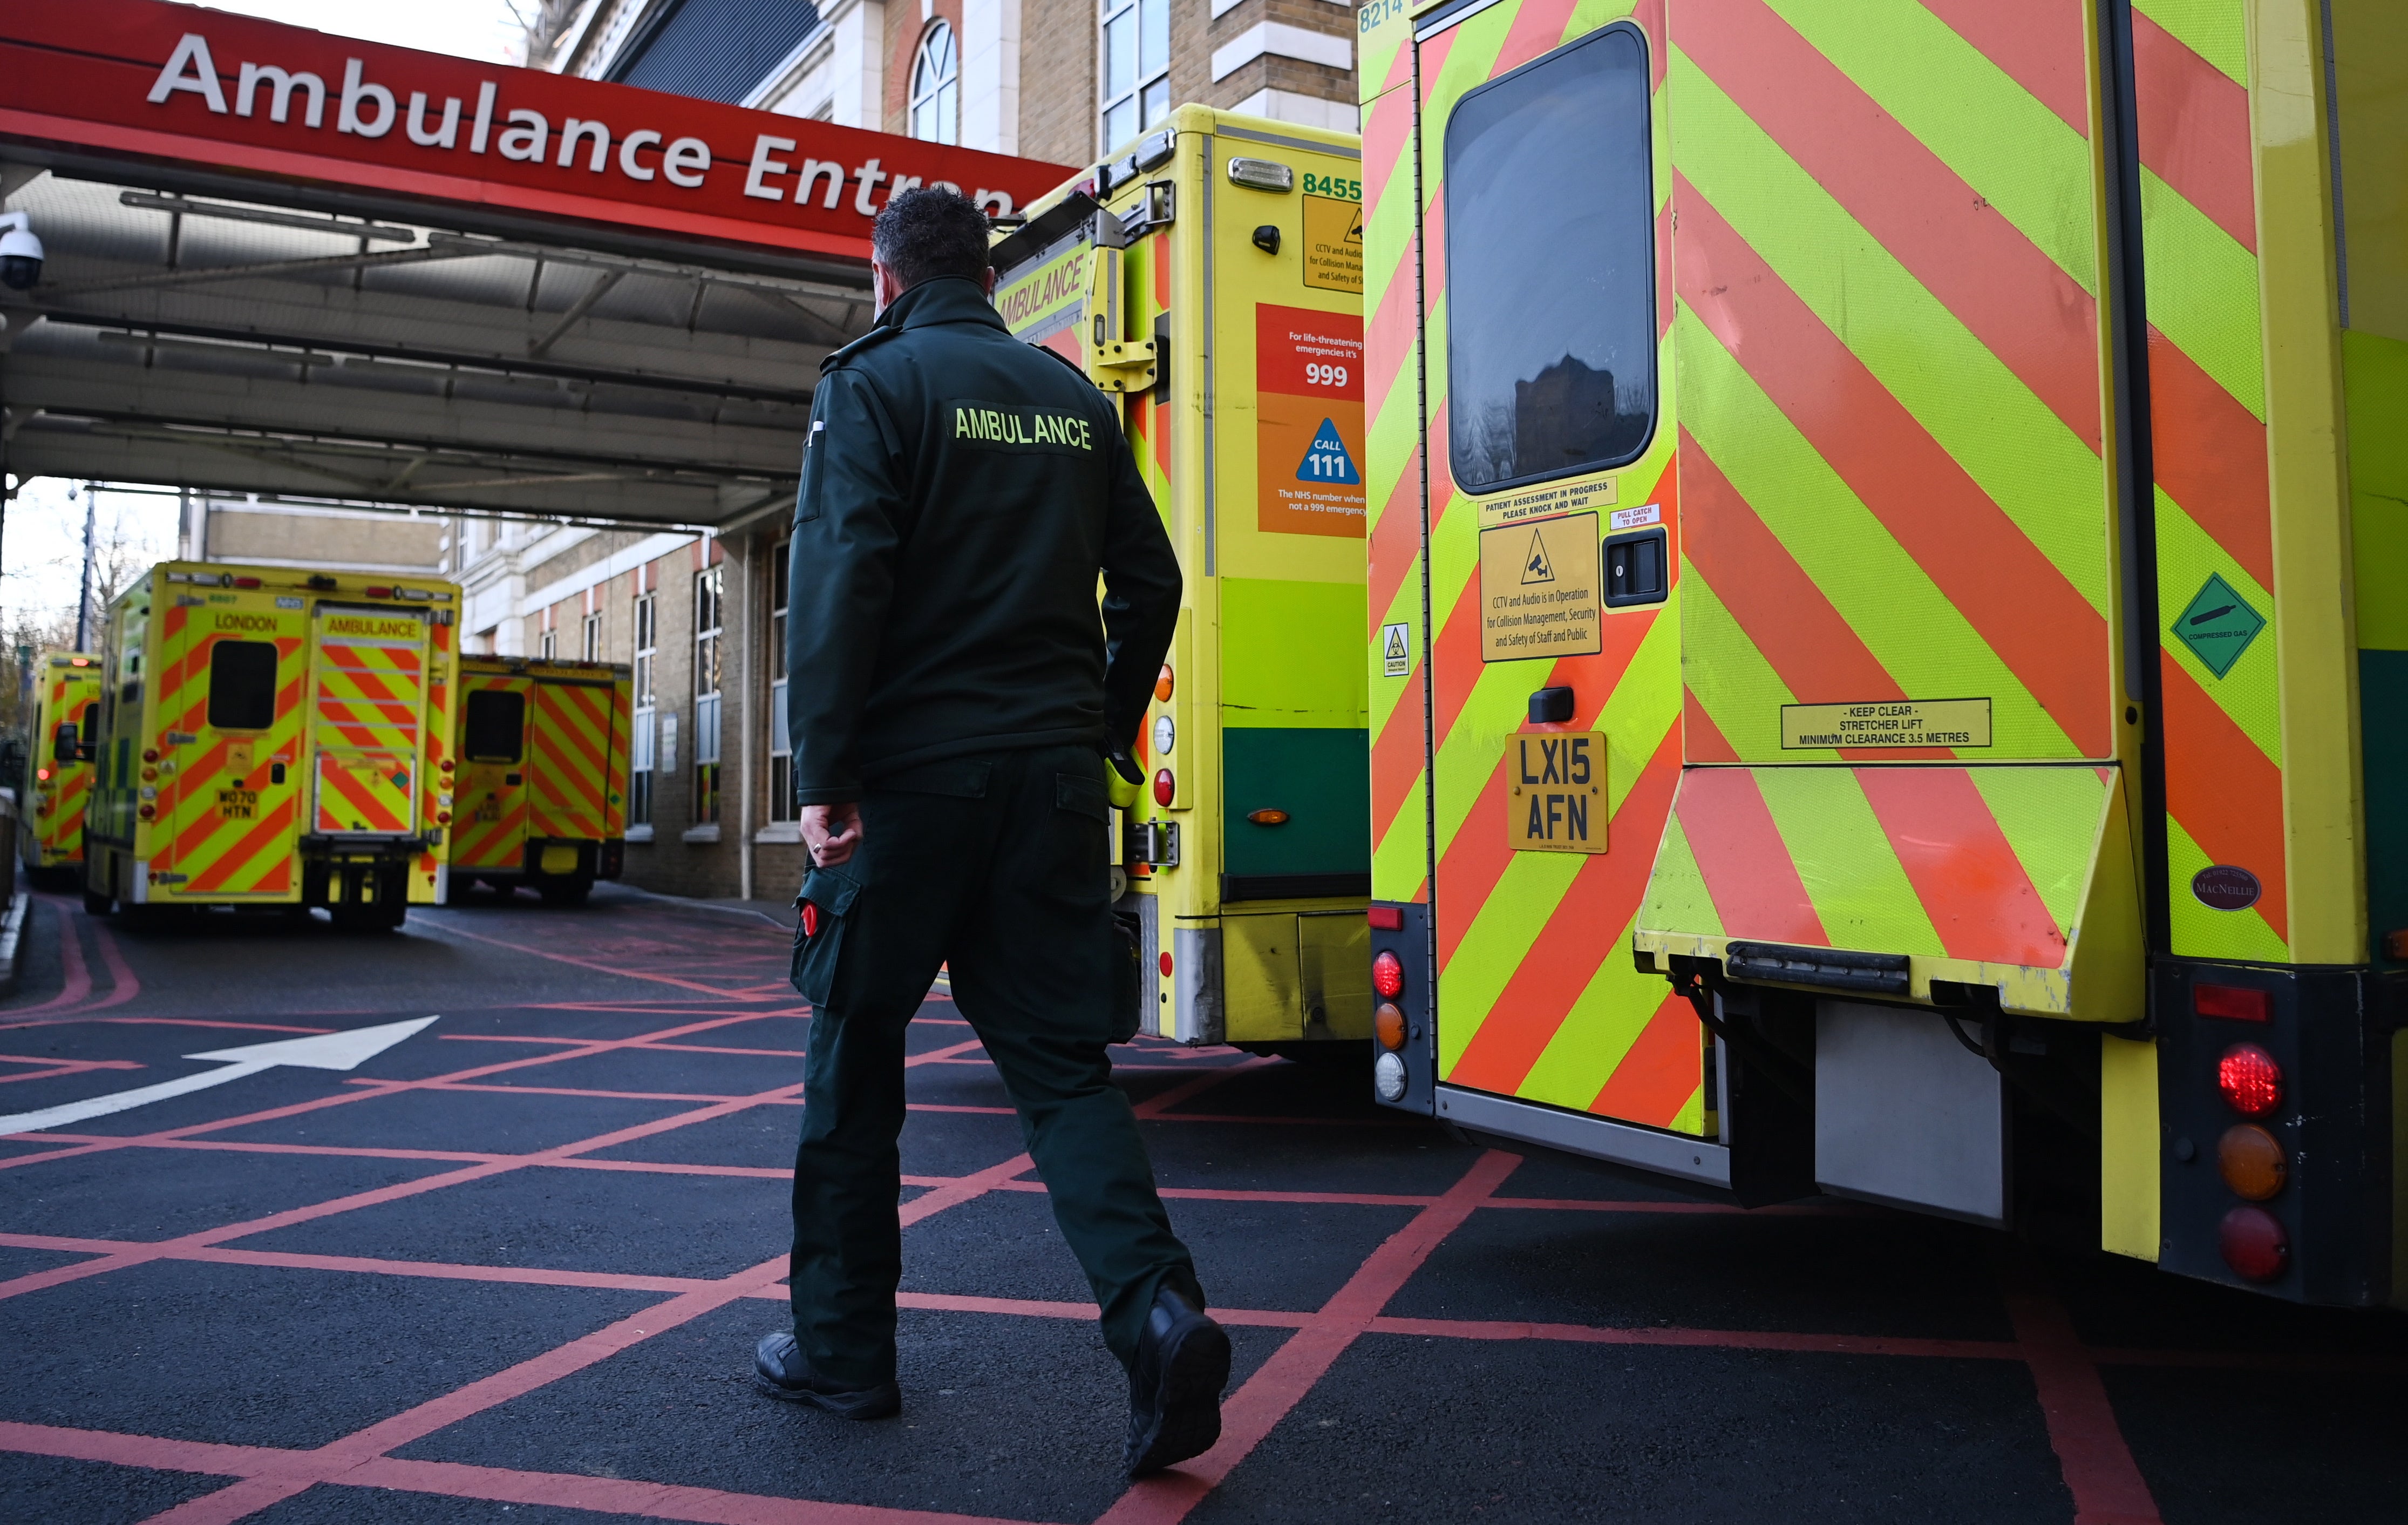 Demand for NHS services has jumped in the past week partly due to an increase in Strep A cases